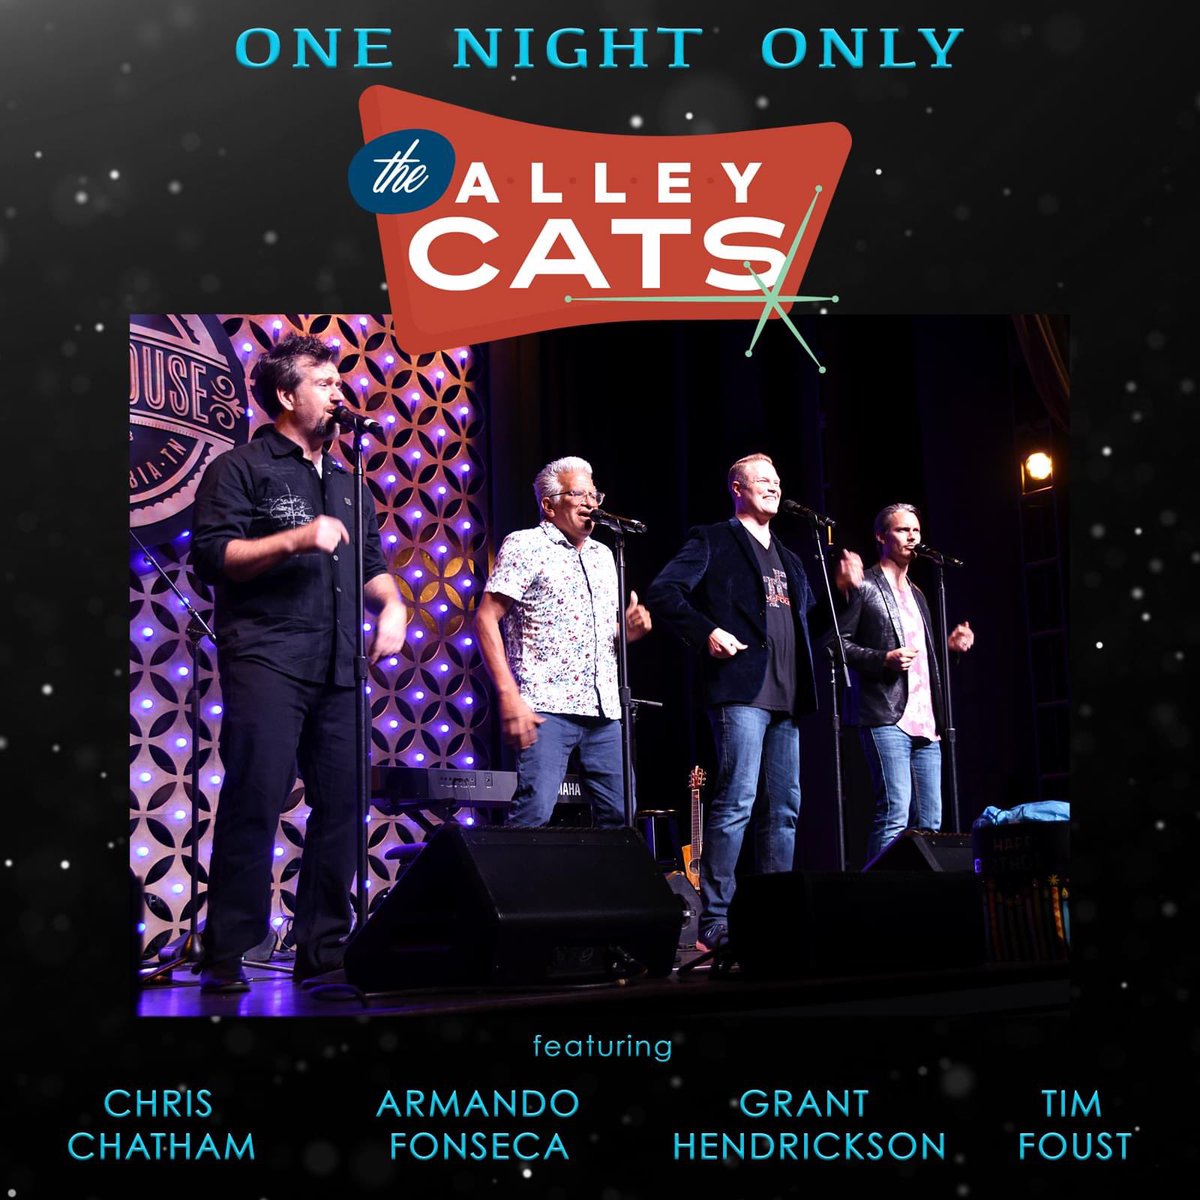 2 shows in the Dallas area this weekend! Friday: The Alley Cats (A Cappella Doo-Wop) Saturday: Austin Brown, Tim Foust & Friends Contact beckycrabtree74@gmail.com for more details and tickets…